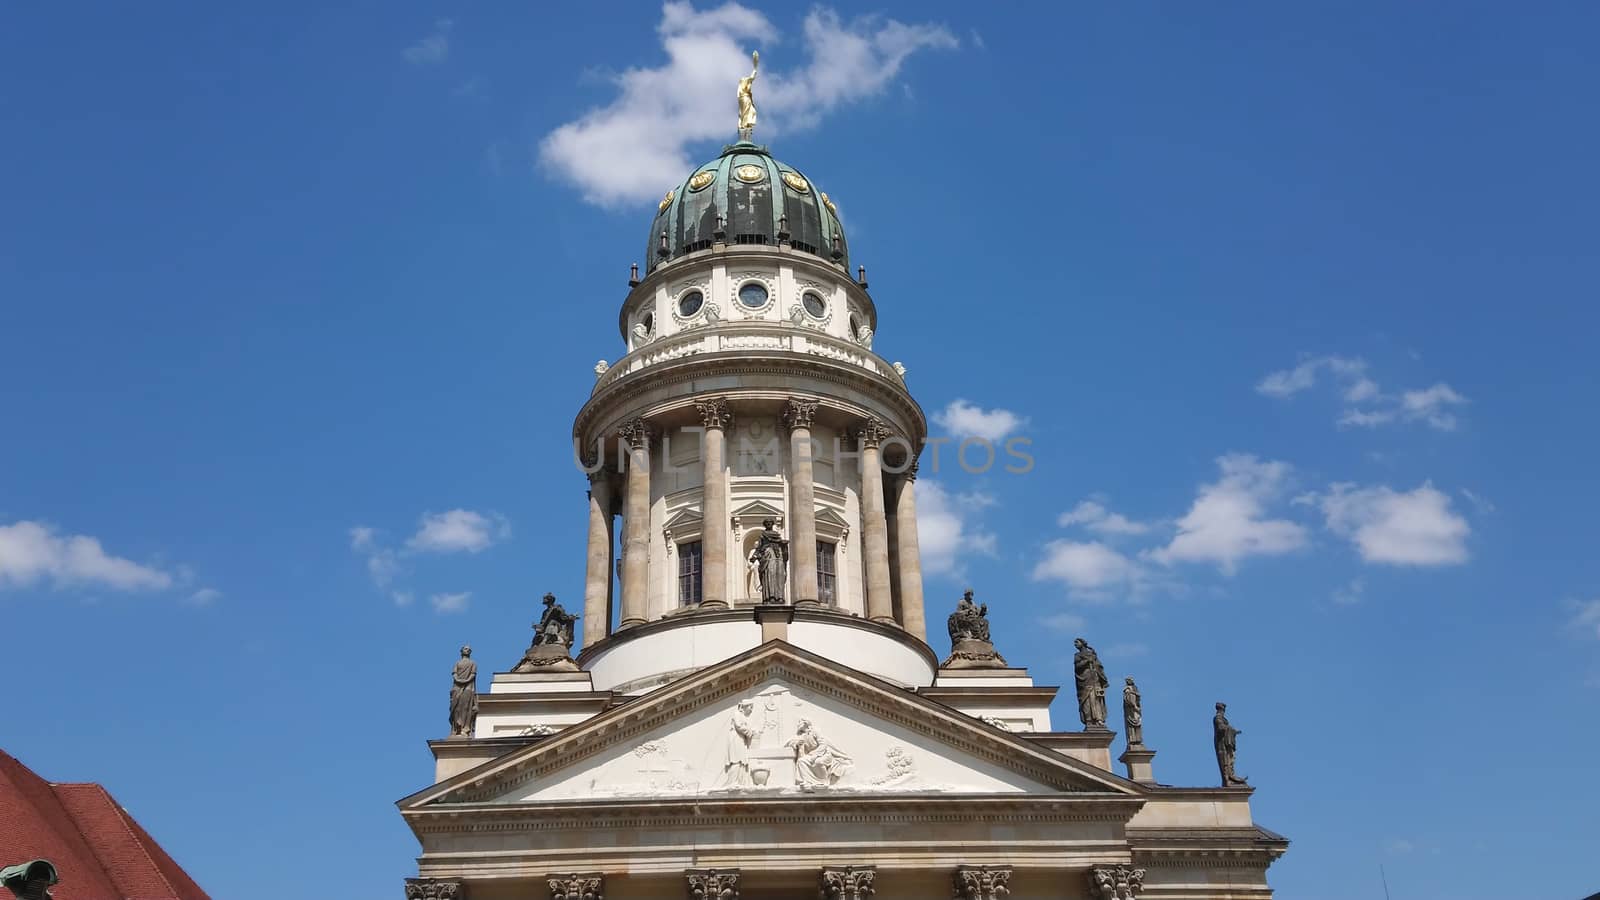 Dome of German Cathedral in Berlin by Lattwein